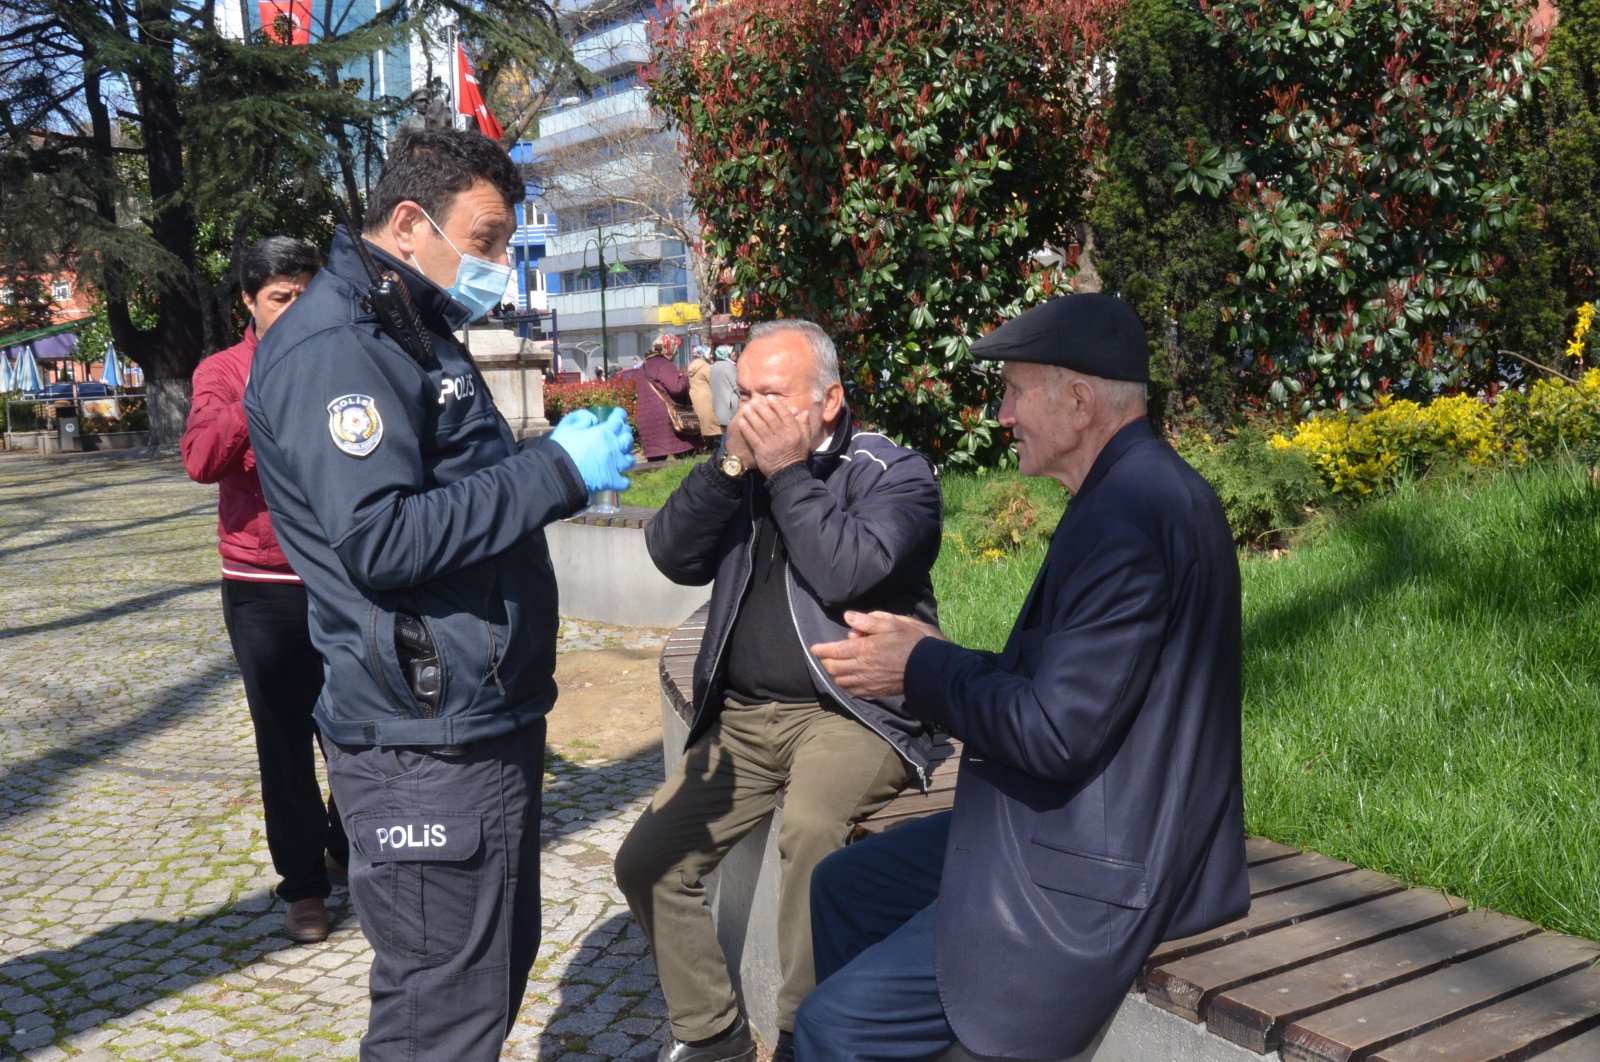 Police officer in Turkey's Zongulak offers elderly Turkish cologne and tells them that they are supposed to be at home, offers ride home, March 21, 2020. (IHA Photo)